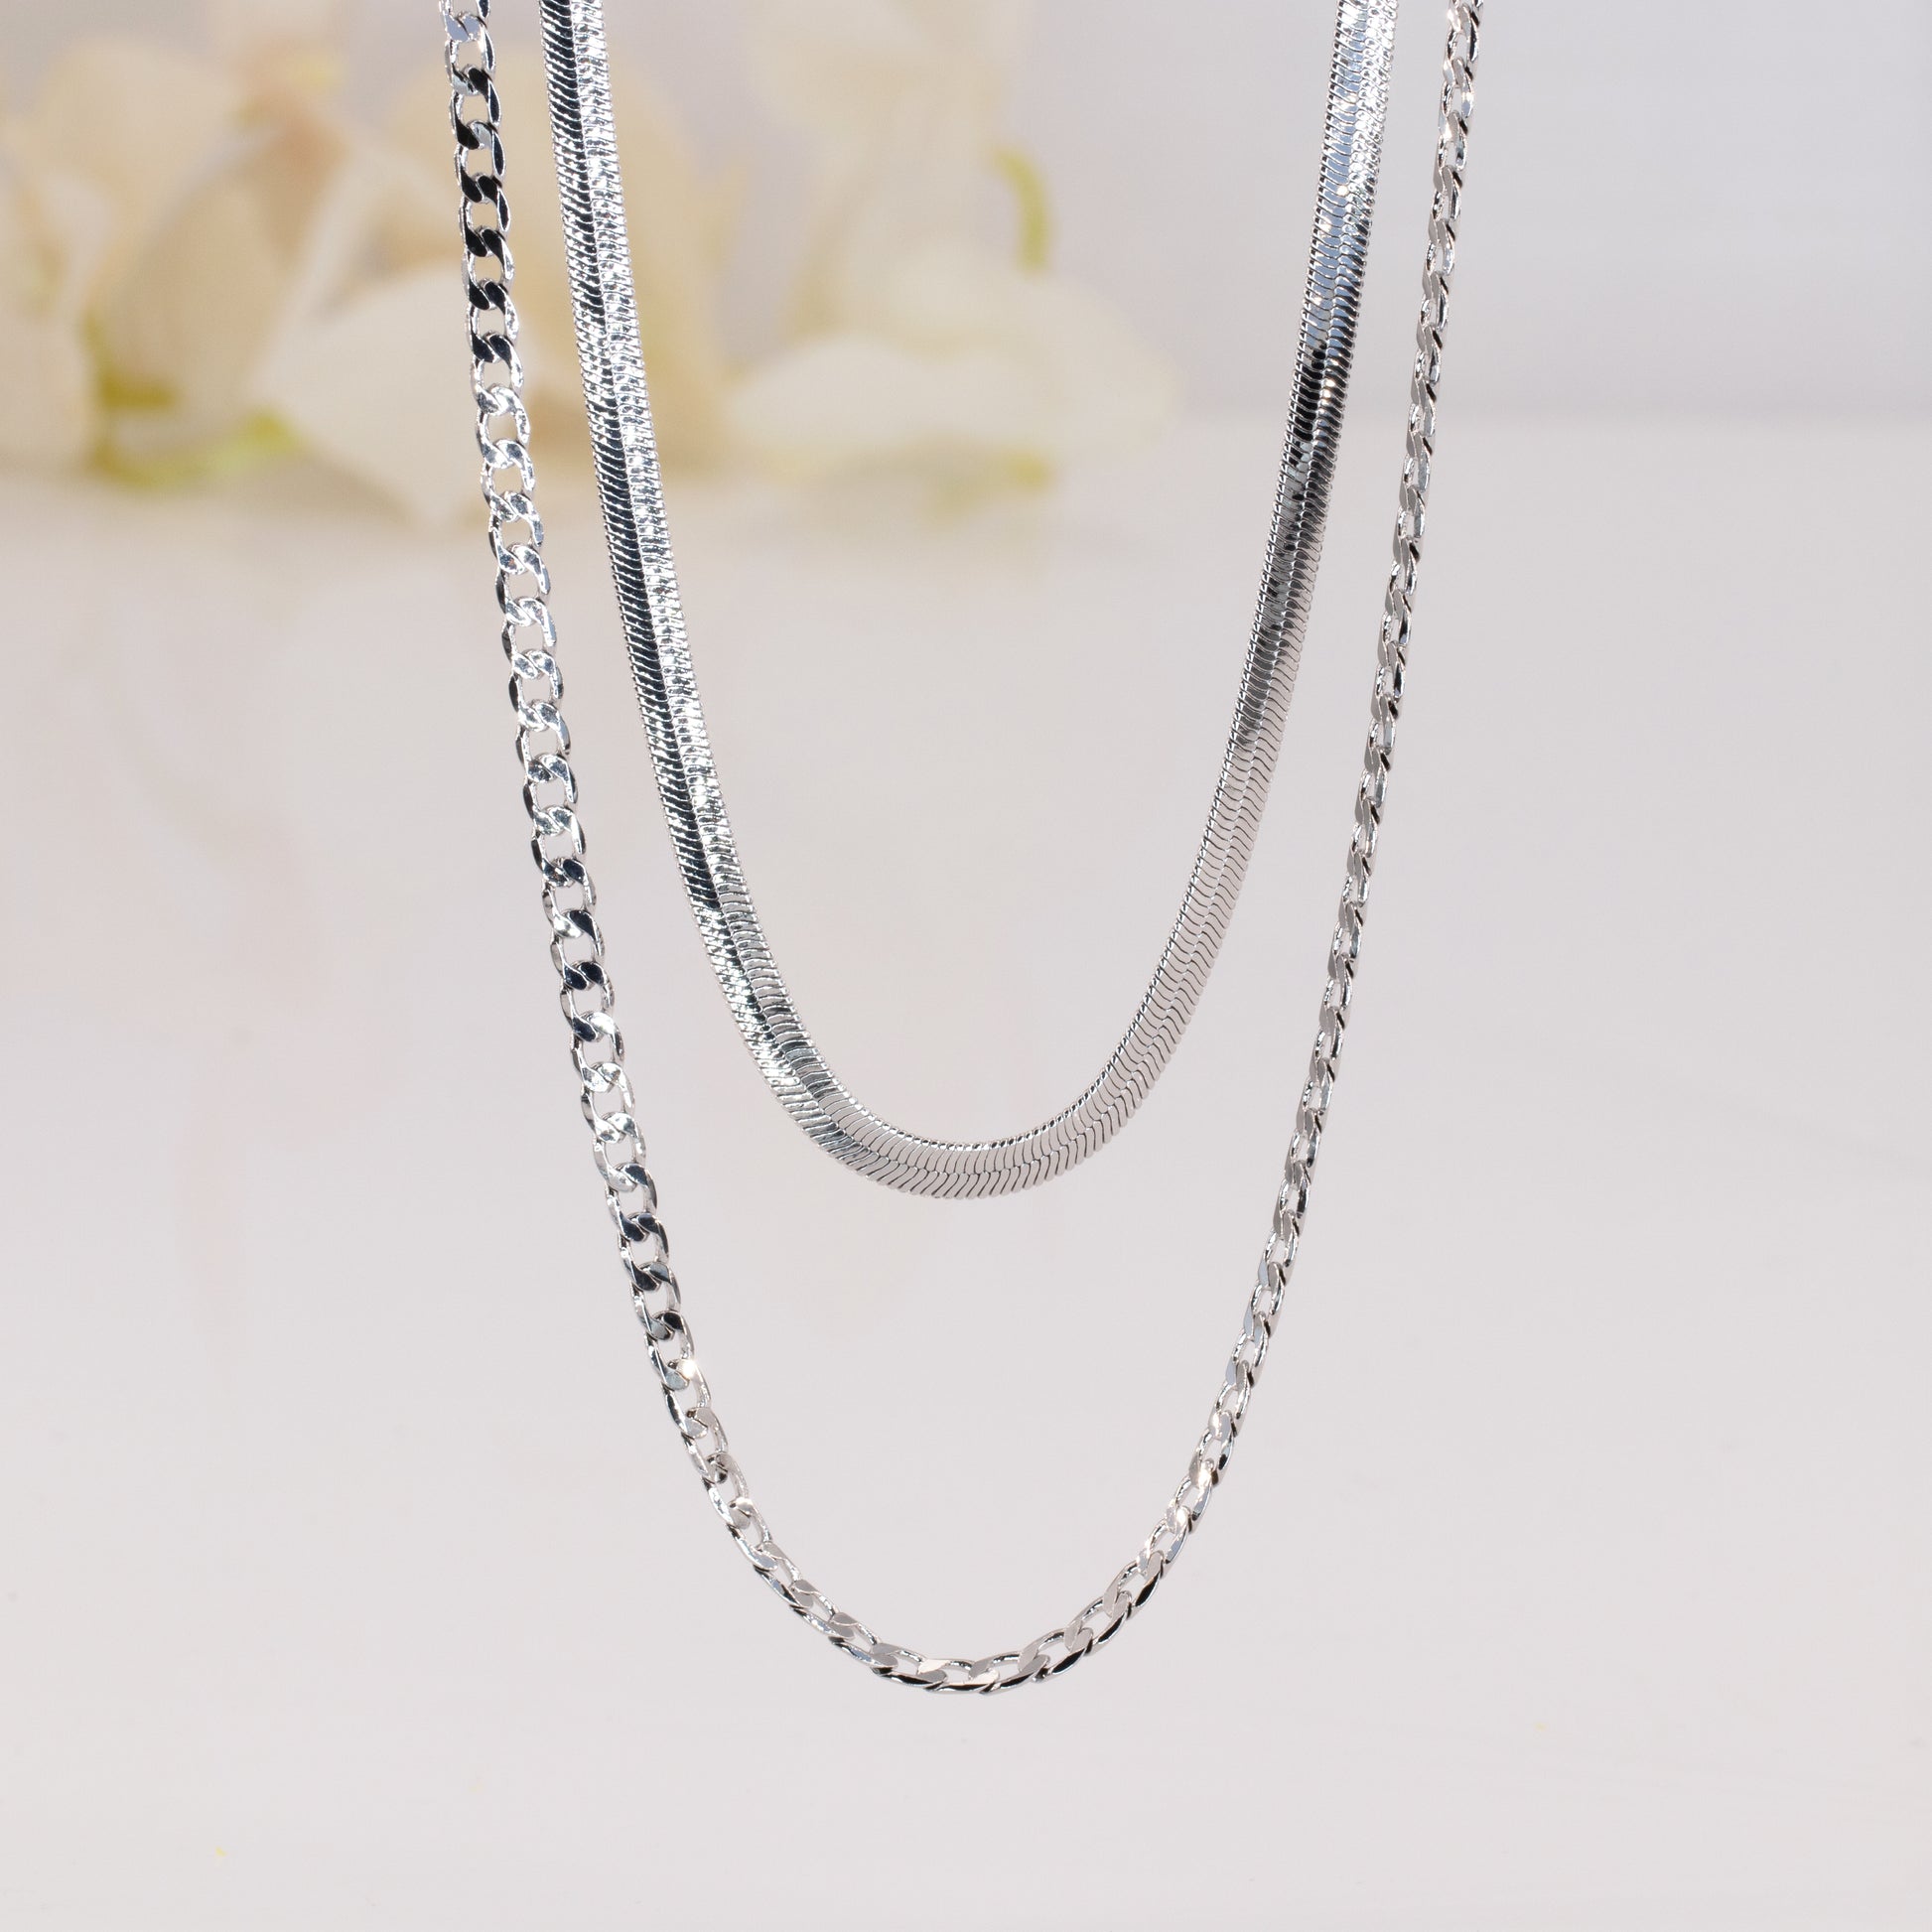 Hoisy Layered Chain Necklace, Necklace Chains for Pendants Snake Chain  Necklaces Fashion Jewelry for Women and Girls